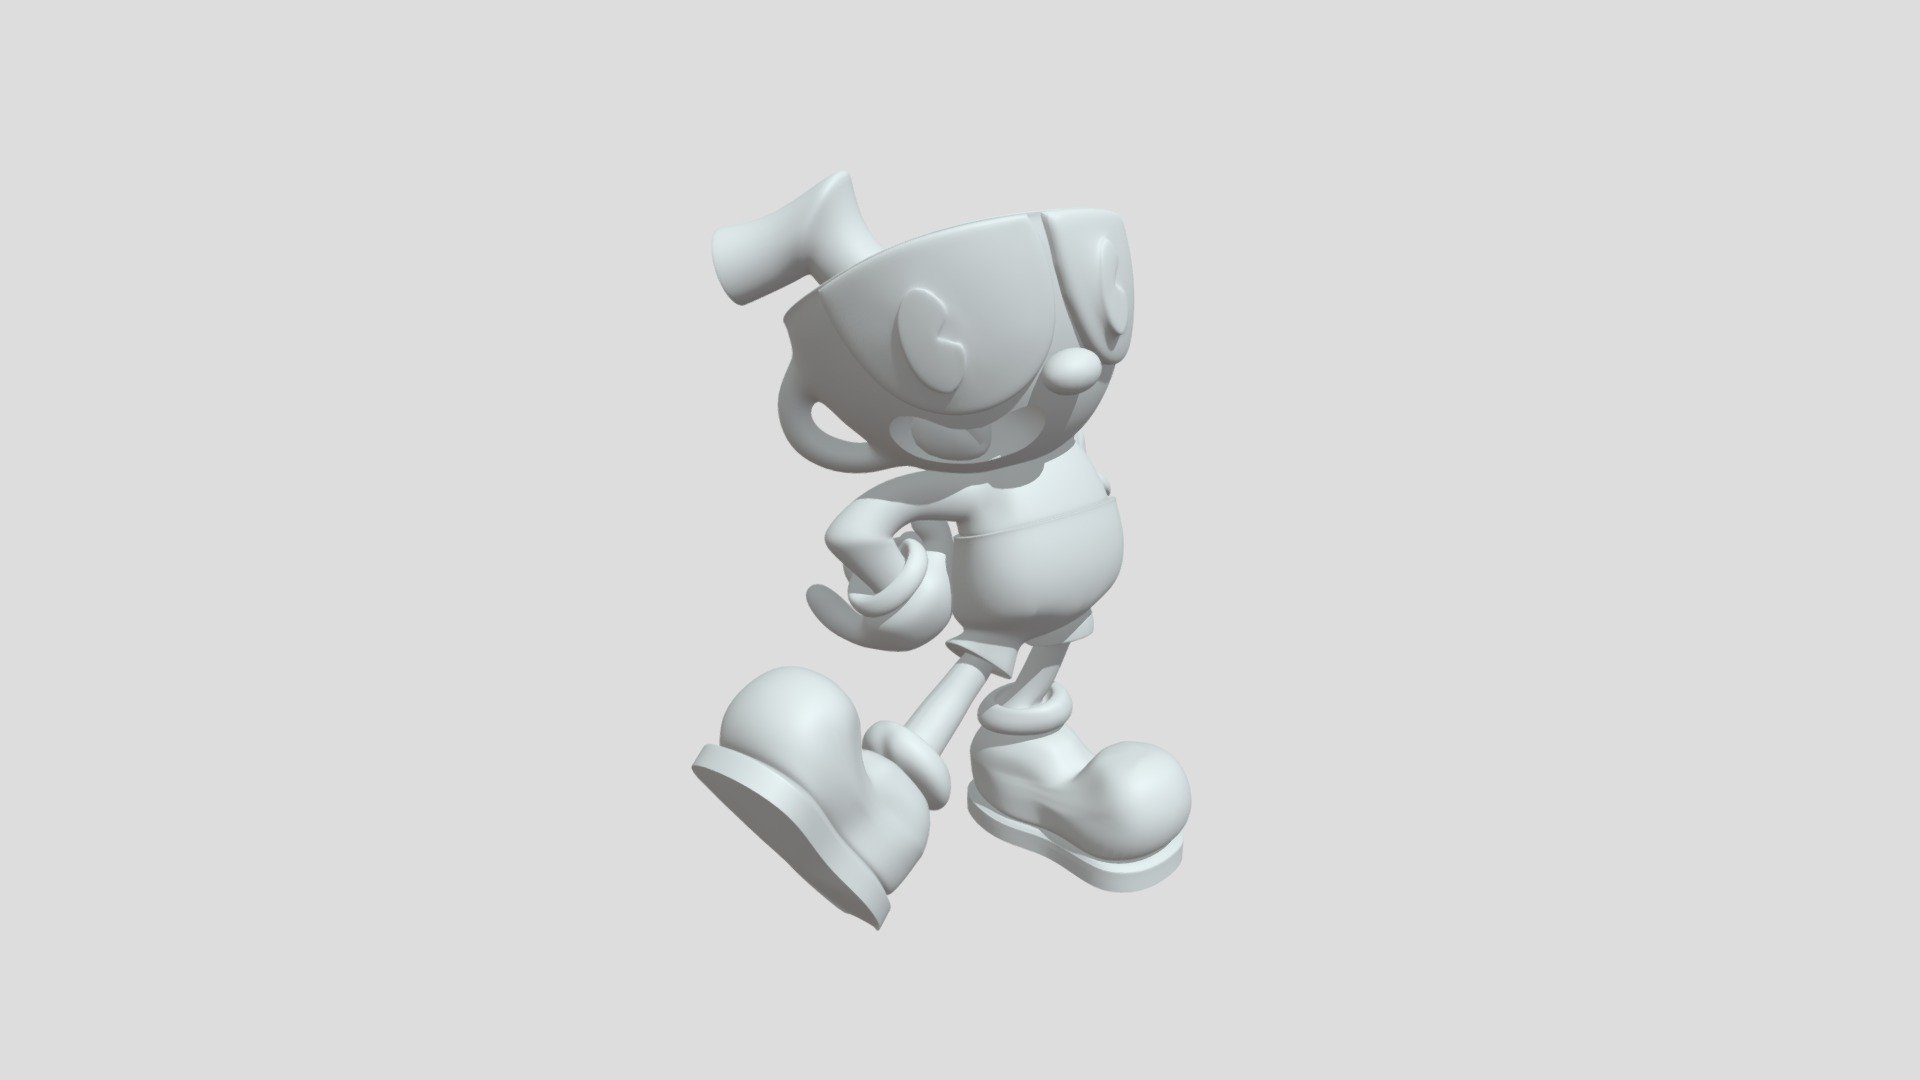 Cuphead 3D model for 3D printing - Cuphead for 3D printing - Buy Royalty Free 3D model by AlejandraSalamandra 3d model